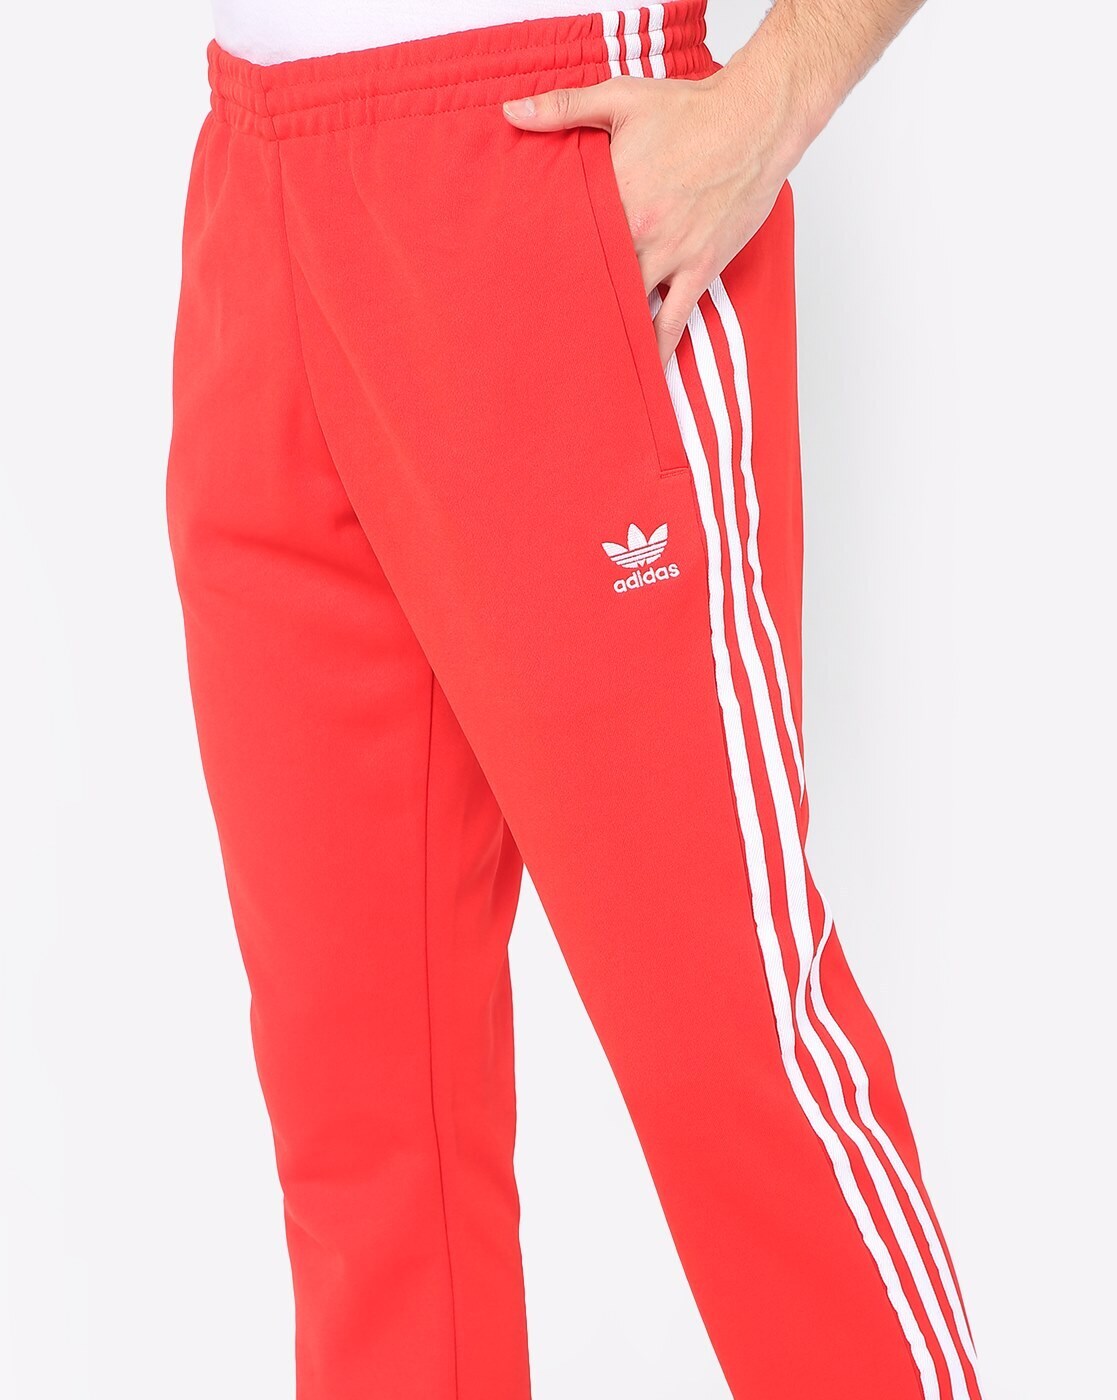 Solid Adidas Joggers Lower Regular Fit